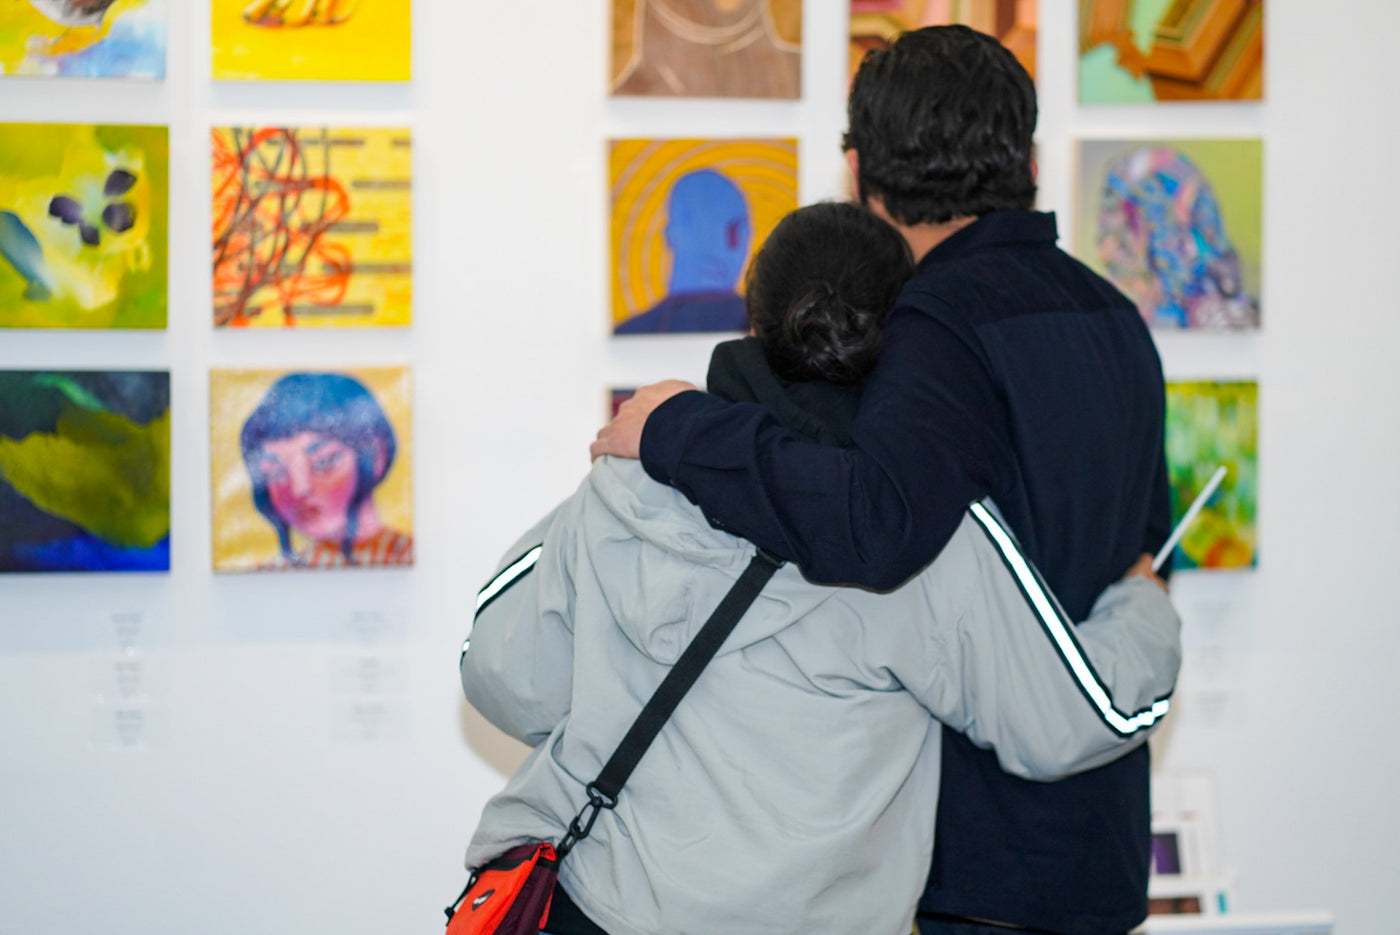 Photograph of a couple hugging and viewing artwok during the "It's BASL, Baby!" group exhibition VIP Young Collectors Event at Voss Gallery, San Francisco, December 4, 2020.